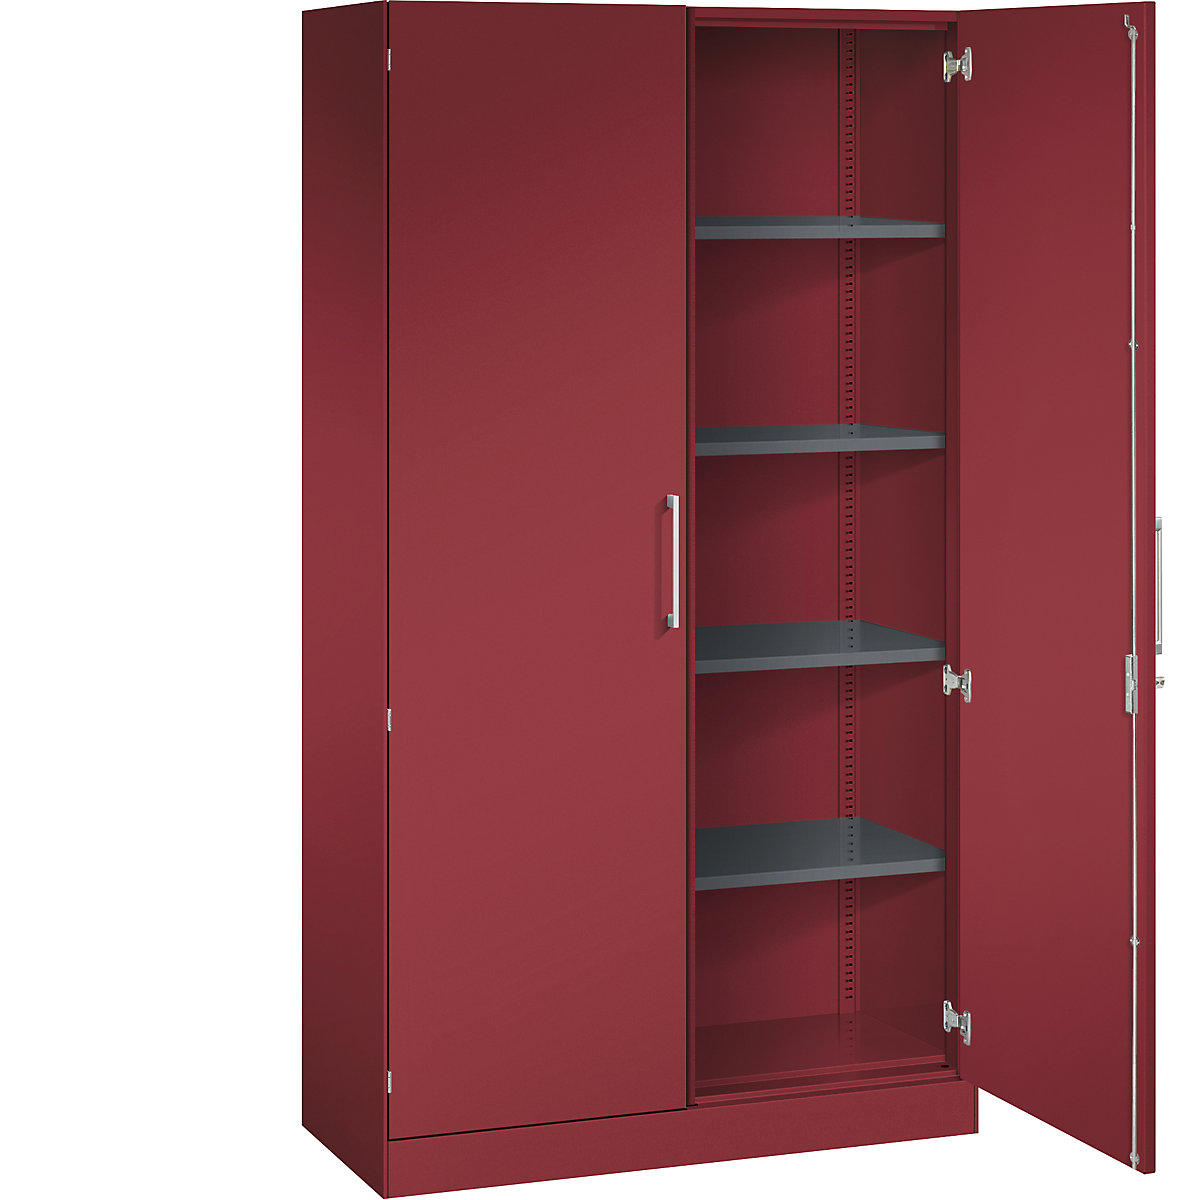 ASISTO double door cupboard, height 1980 mm – C+P, width 1000 mm, 4 shelves, ruby red/ruby red-11